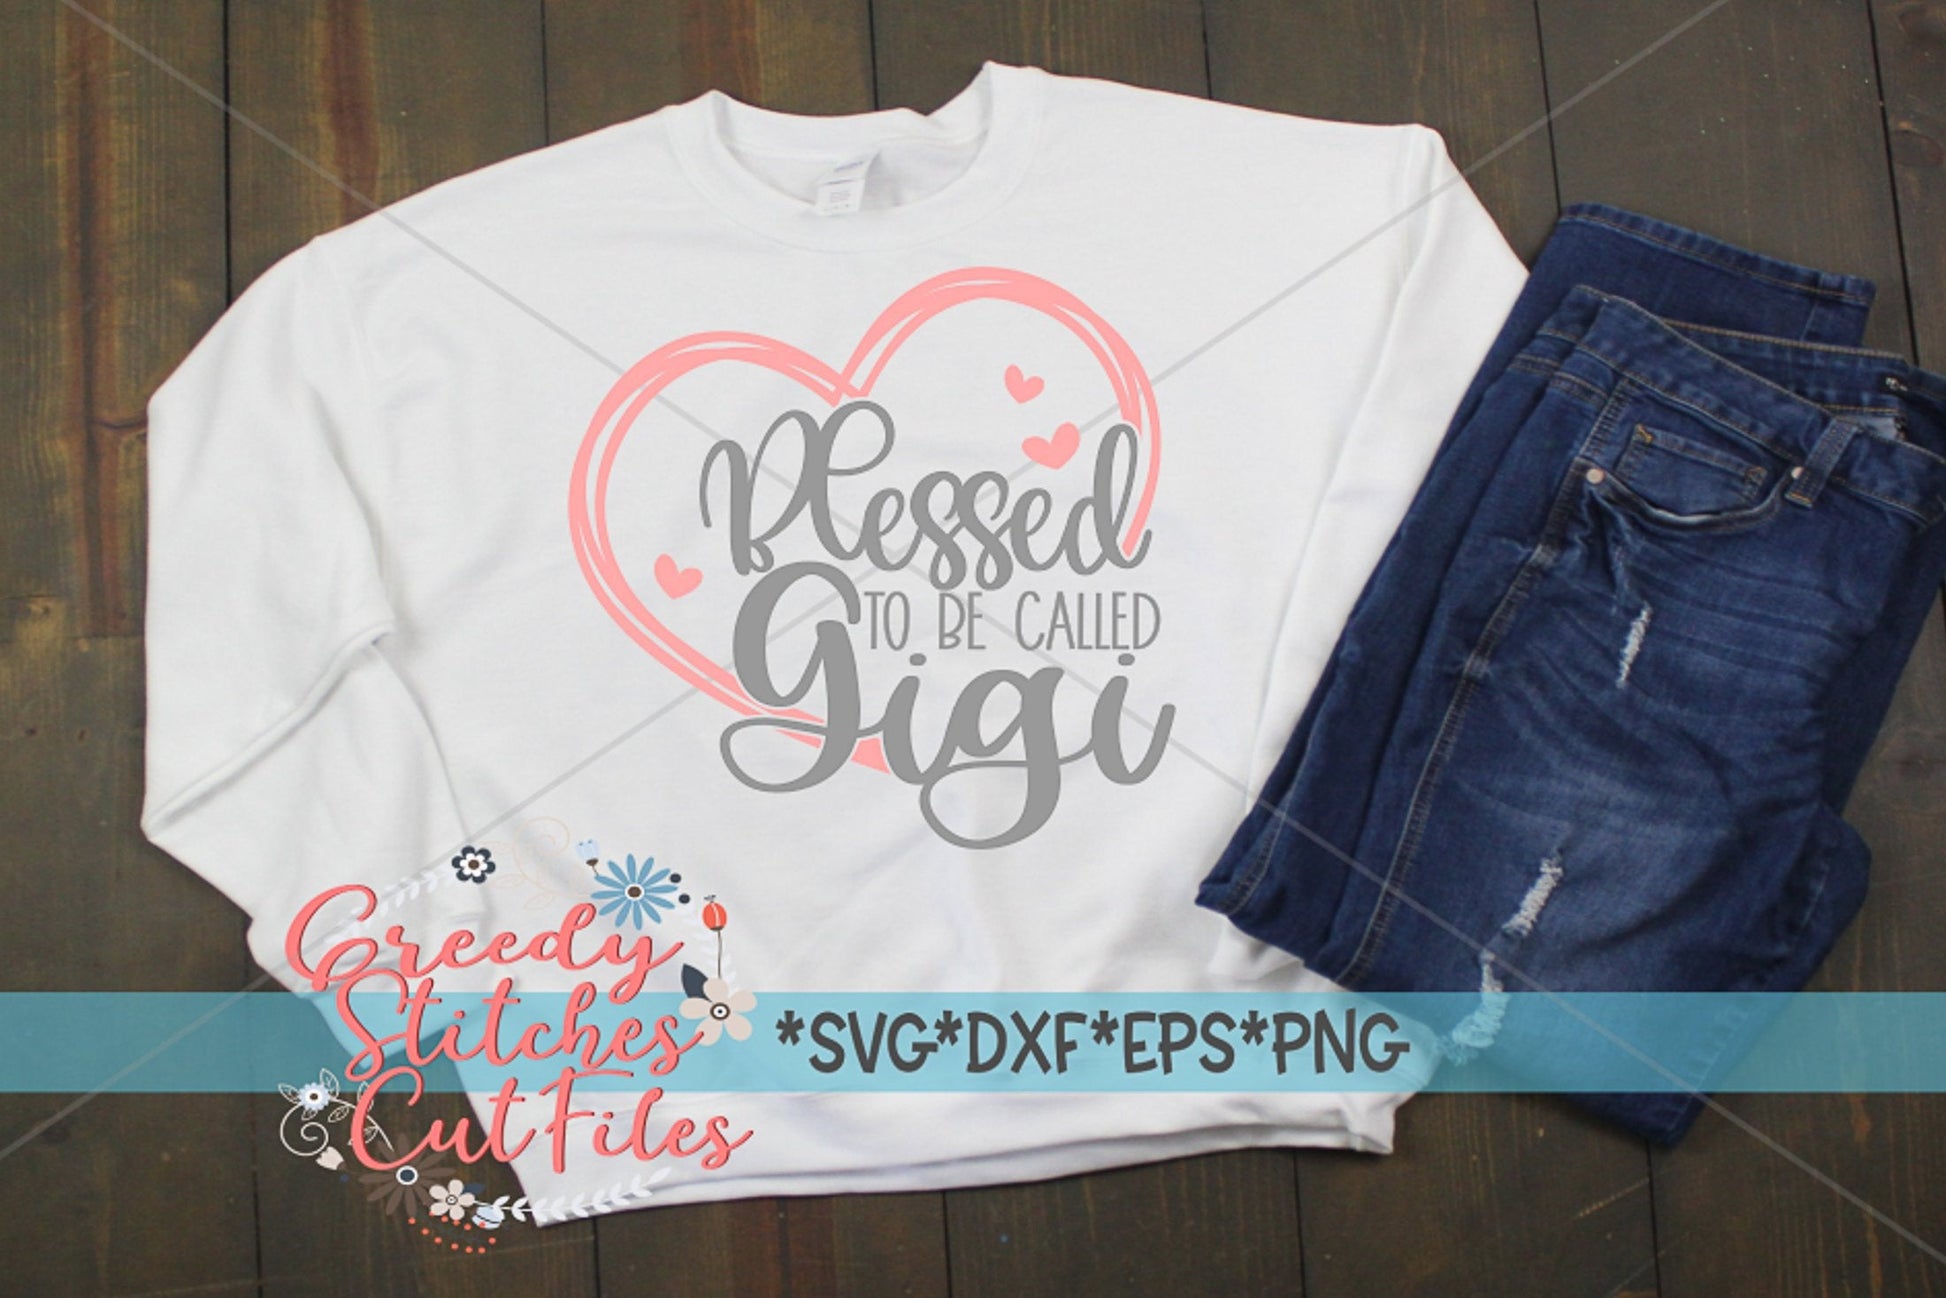 Blessed To Be Called Gigi SvG | Mother&#39;s Day SVG | Gigi EpS | Gigi SVG | Gigi DxF | Blessed Gigi svg dxf eps png. Instant Download Cut File